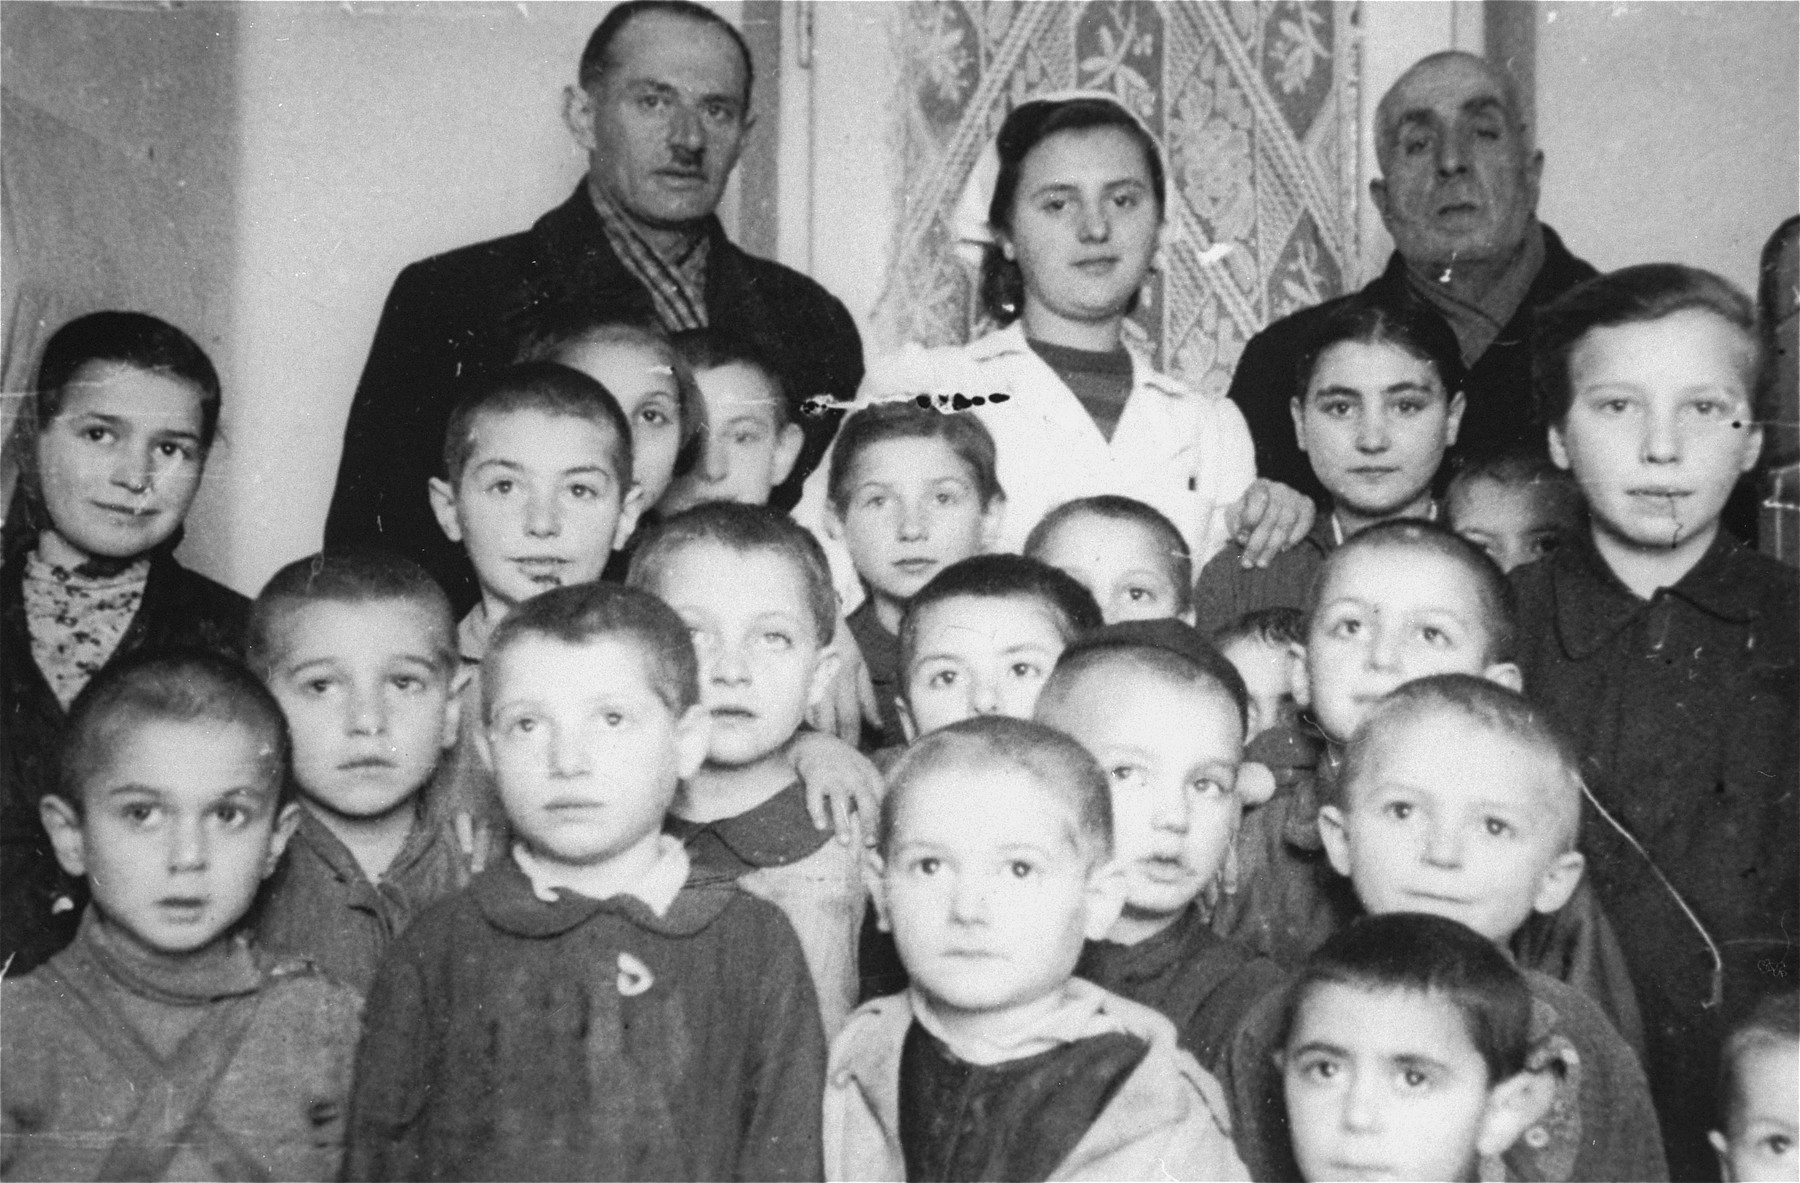 Group portrait of the children and staff of a daycare center in the Kielce ghetto that was administered by the Judenrat (Jewish Council).

This photo was one the images included in an official album prepared by the Judenrat of the Kielce ghetto in 1942.